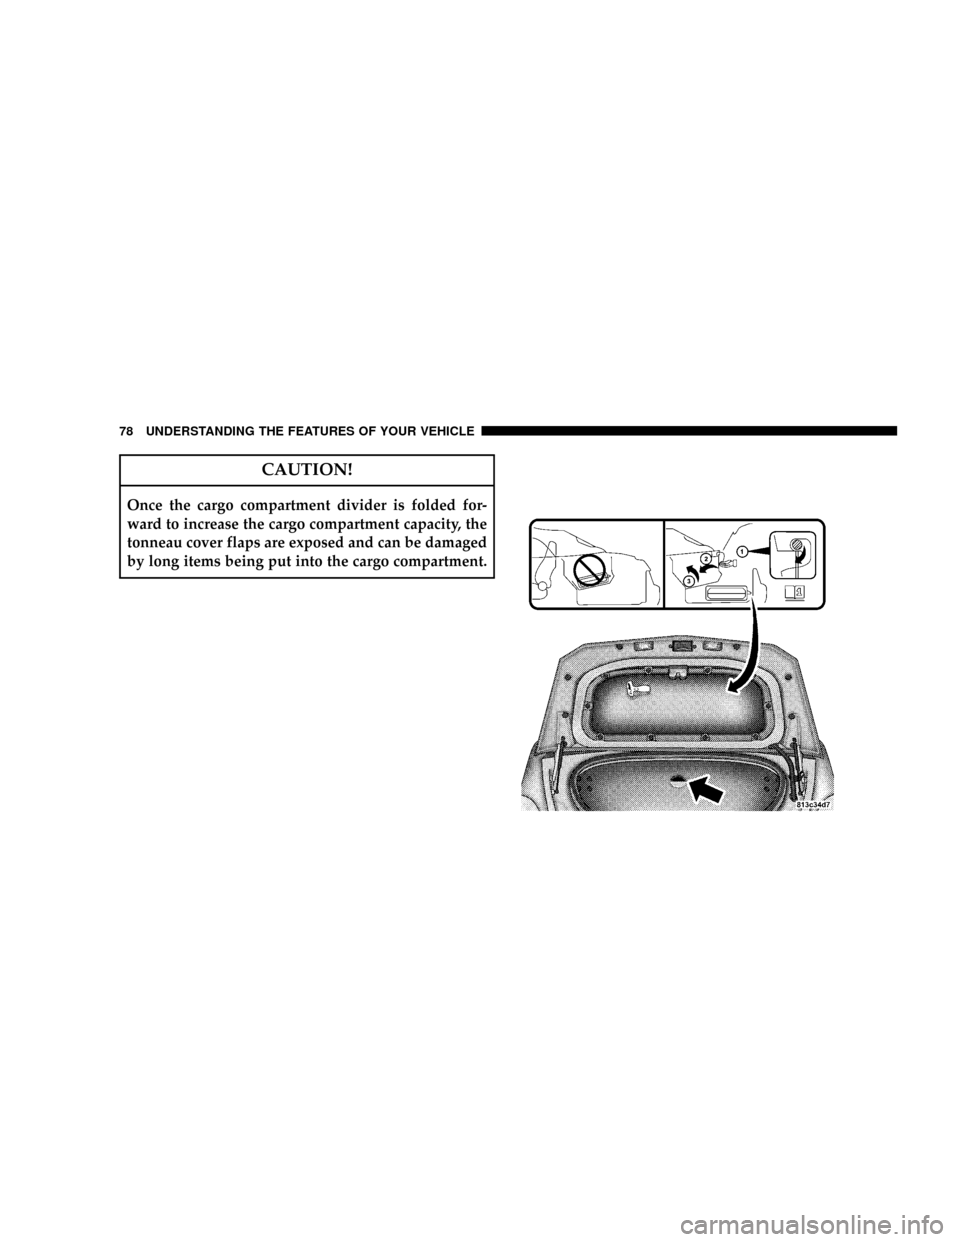 CHRYSLER CROSSFIRE 2008 1.G Manual PDF CAUTION!
Once the cargo compartment divider is folded for-
ward to increase the cargo compartment capacity, the
tonneau cover flaps are exposed and can be damaged
by long items being put into the carg